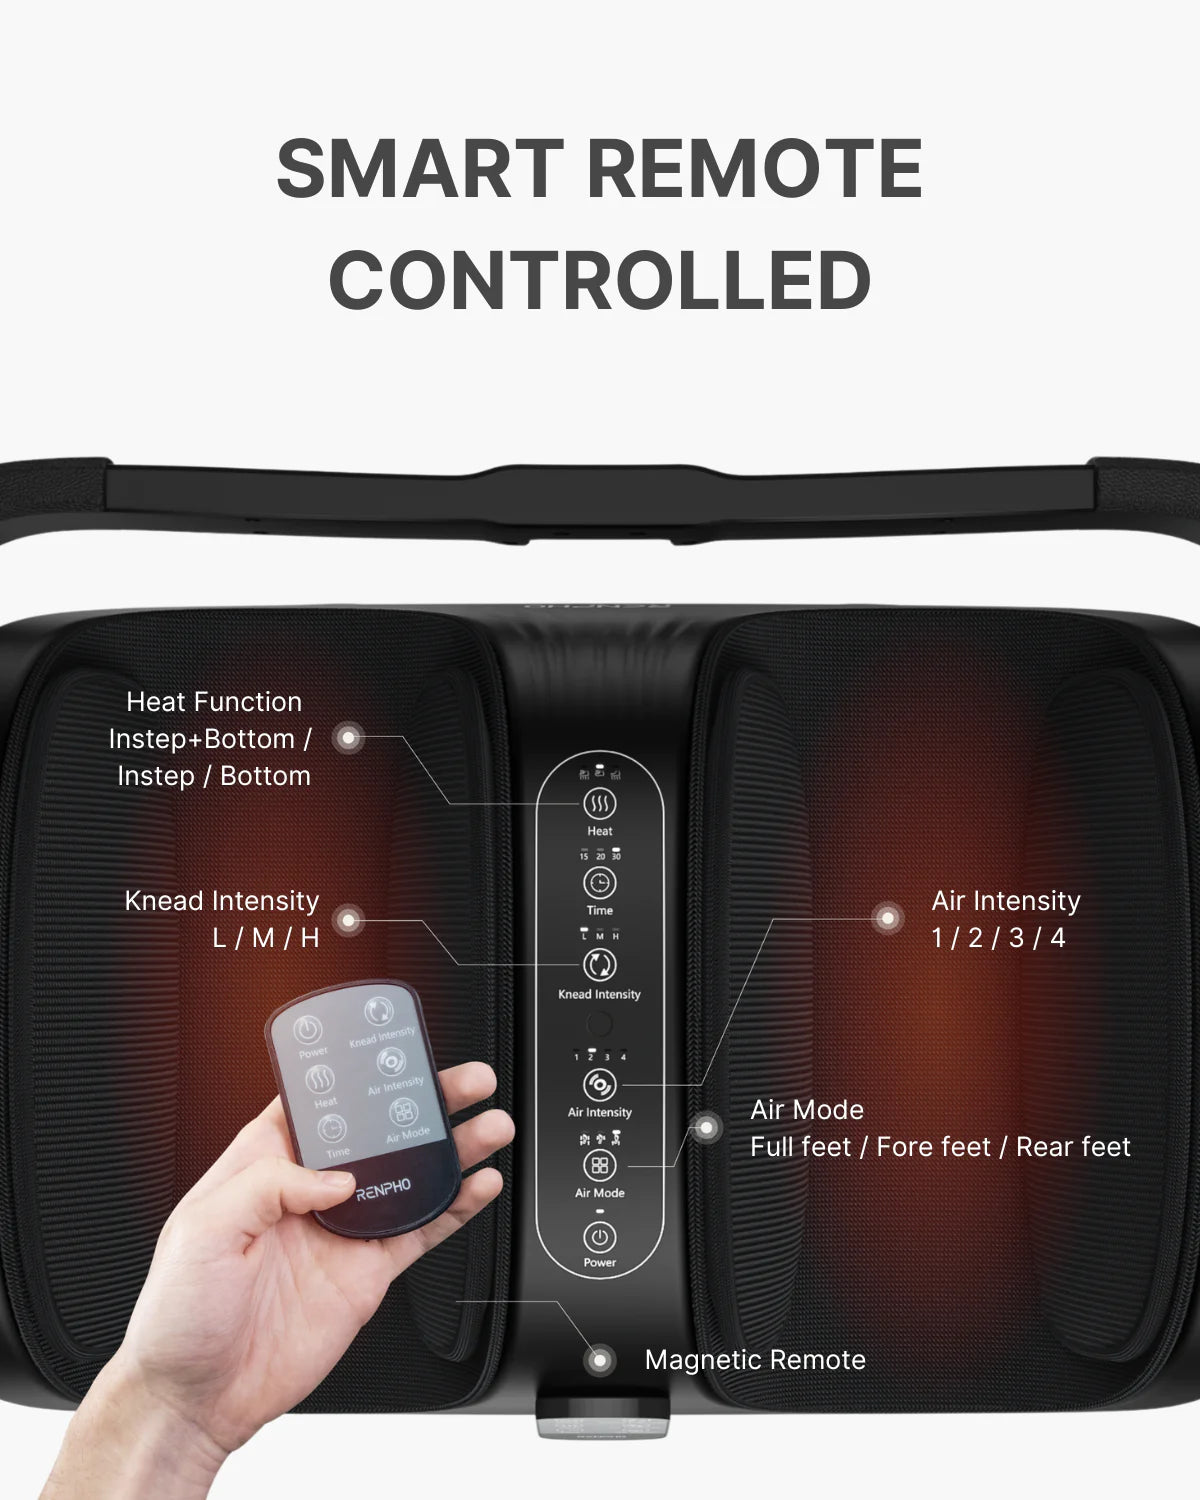 A person holds a magnetic remote in front of the Renpho EU Shiatsu Foot and Calf Massager, which has multiple labeled features including heat function, knead intensity, and air intensity. "SMART REMOTE CONTROLLED" is written at the top. The remote has buttons for various functions and a digital display screen.